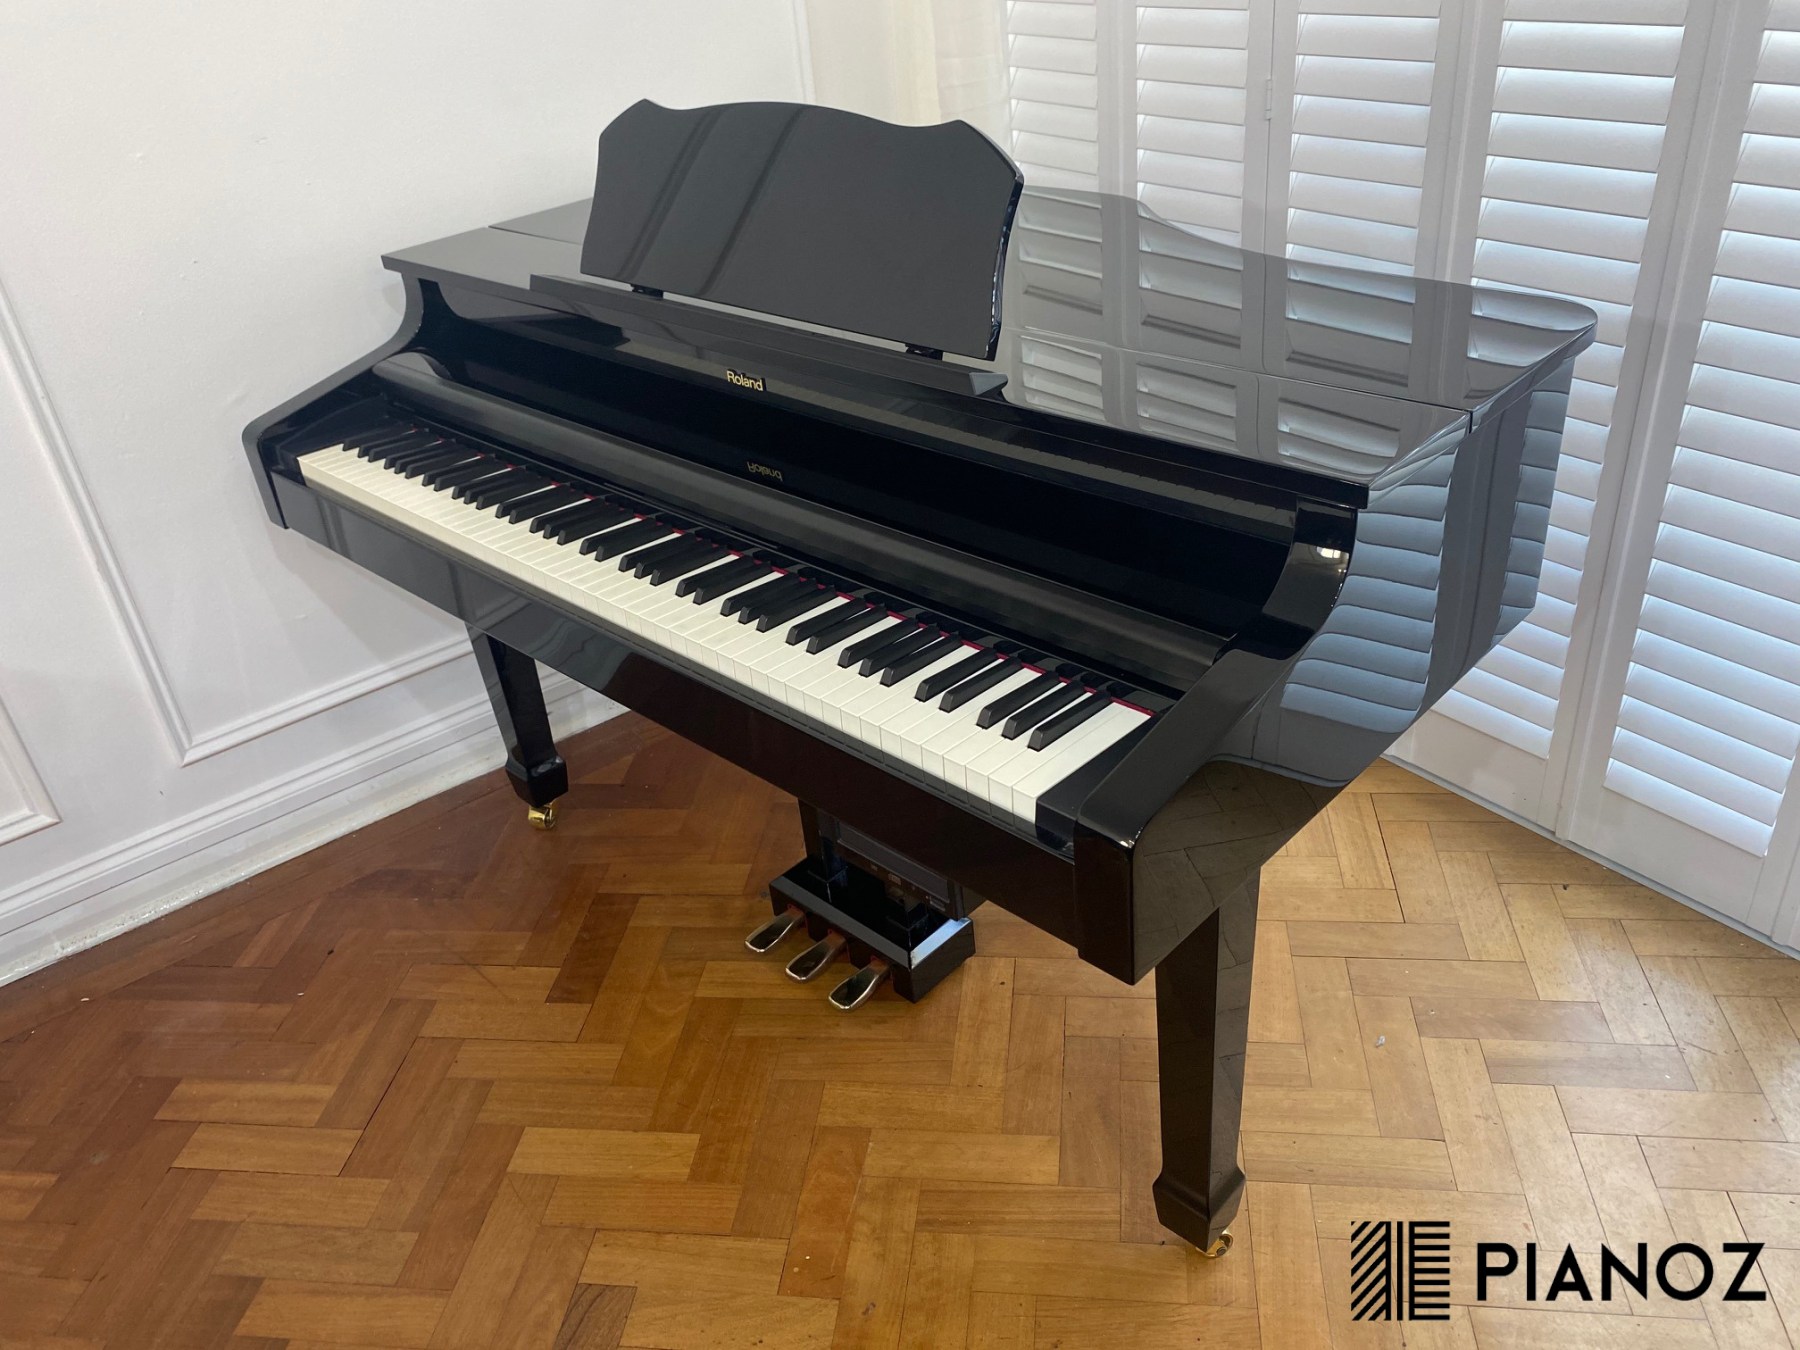 Roland Self Playing Moving Keys Digital Piano piano for sale in UK